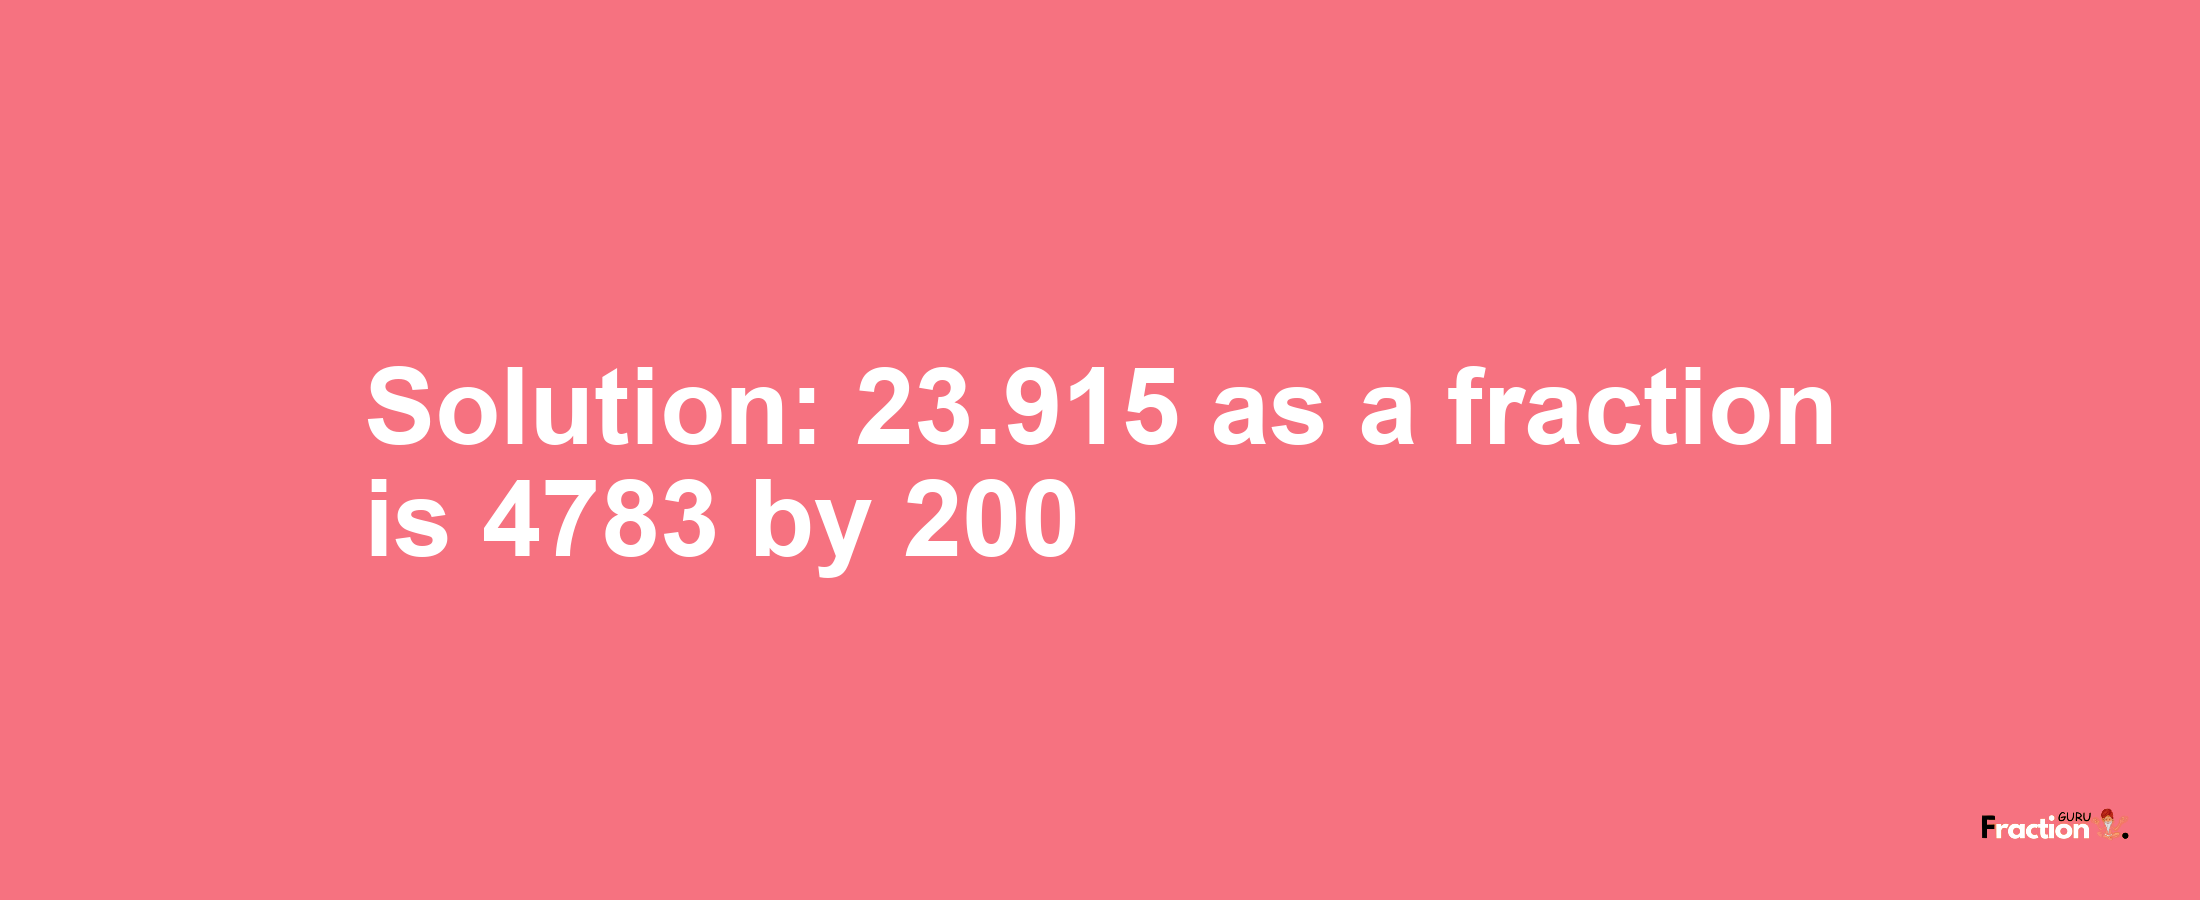 Solution:23.915 as a fraction is 4783/200